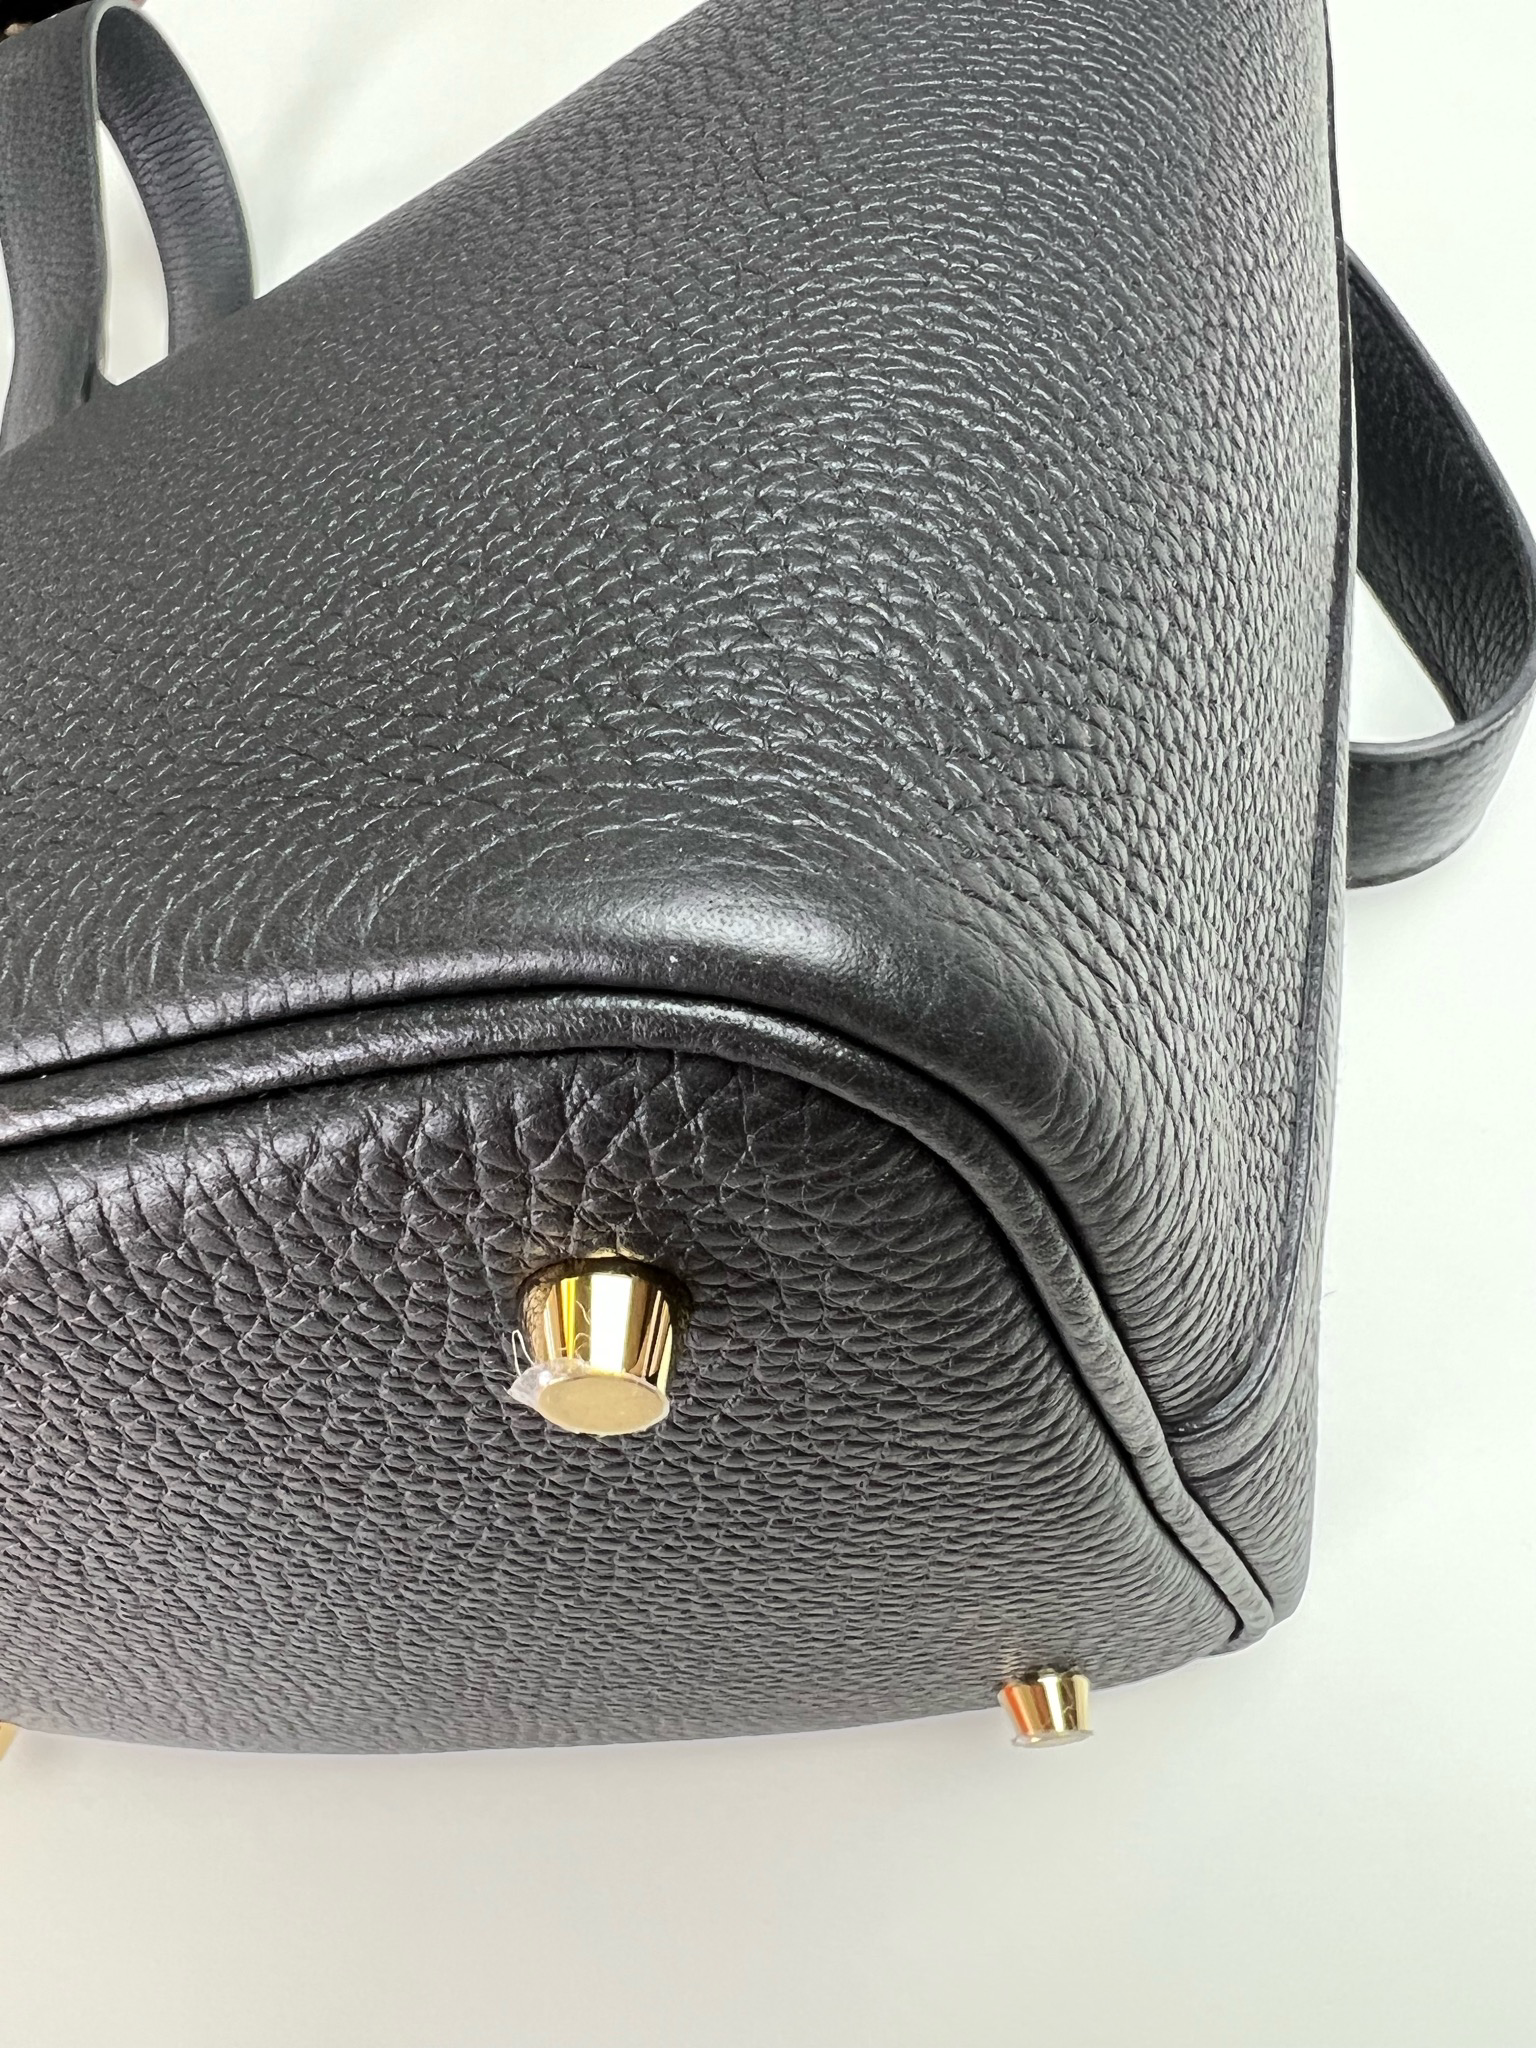 Hermes Picotin 22, Craie Leather with Gold Hardware, Preowned in Box WA001